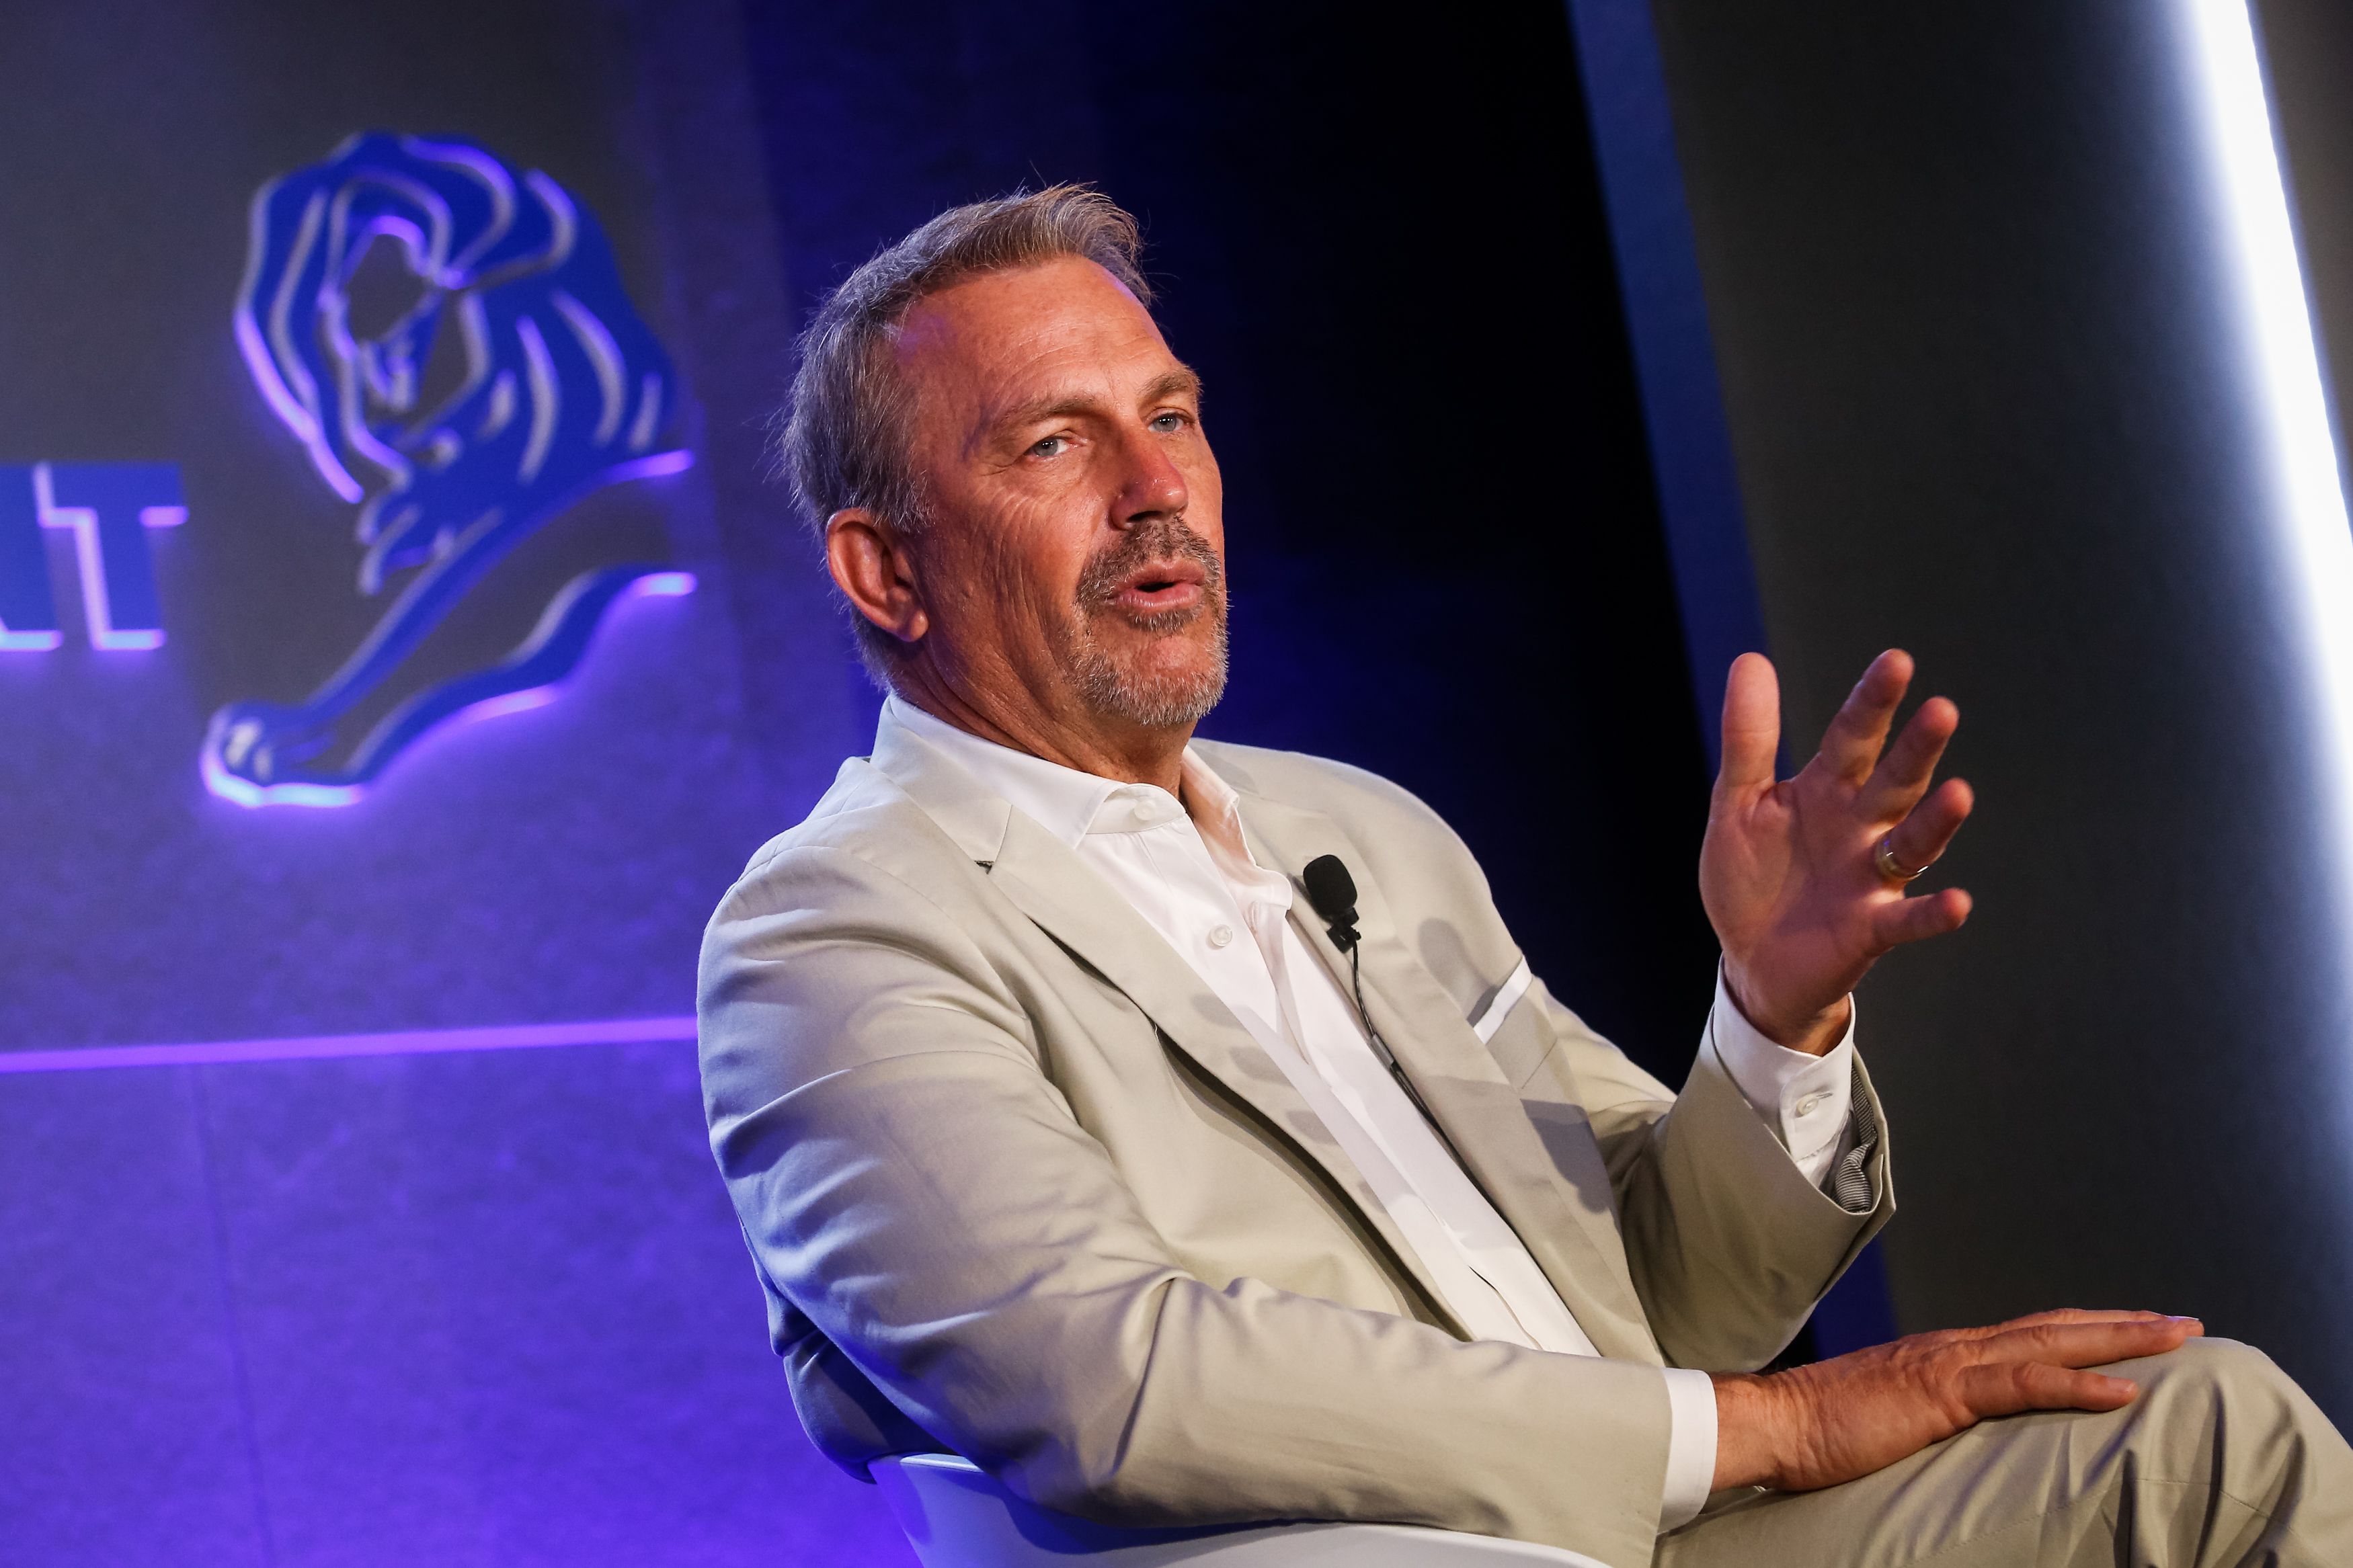 Kevin Costner speaks during the Cannes Lions Festival 2018 on June 21, 2018 | Photo: Getty Images